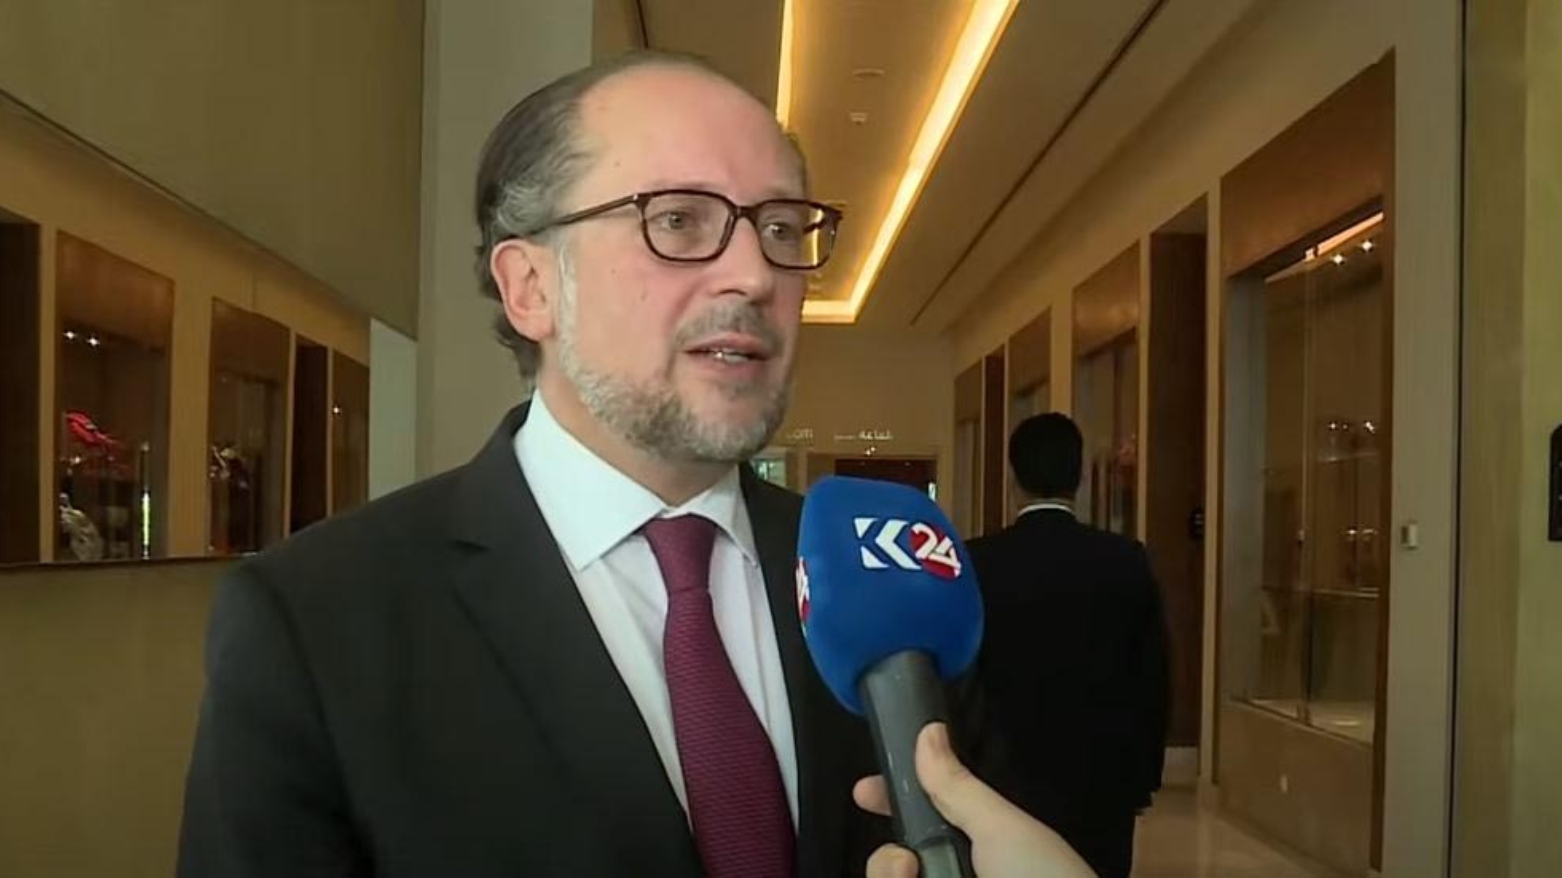 Next step should be honorary consul in Erbil says Austrian FM